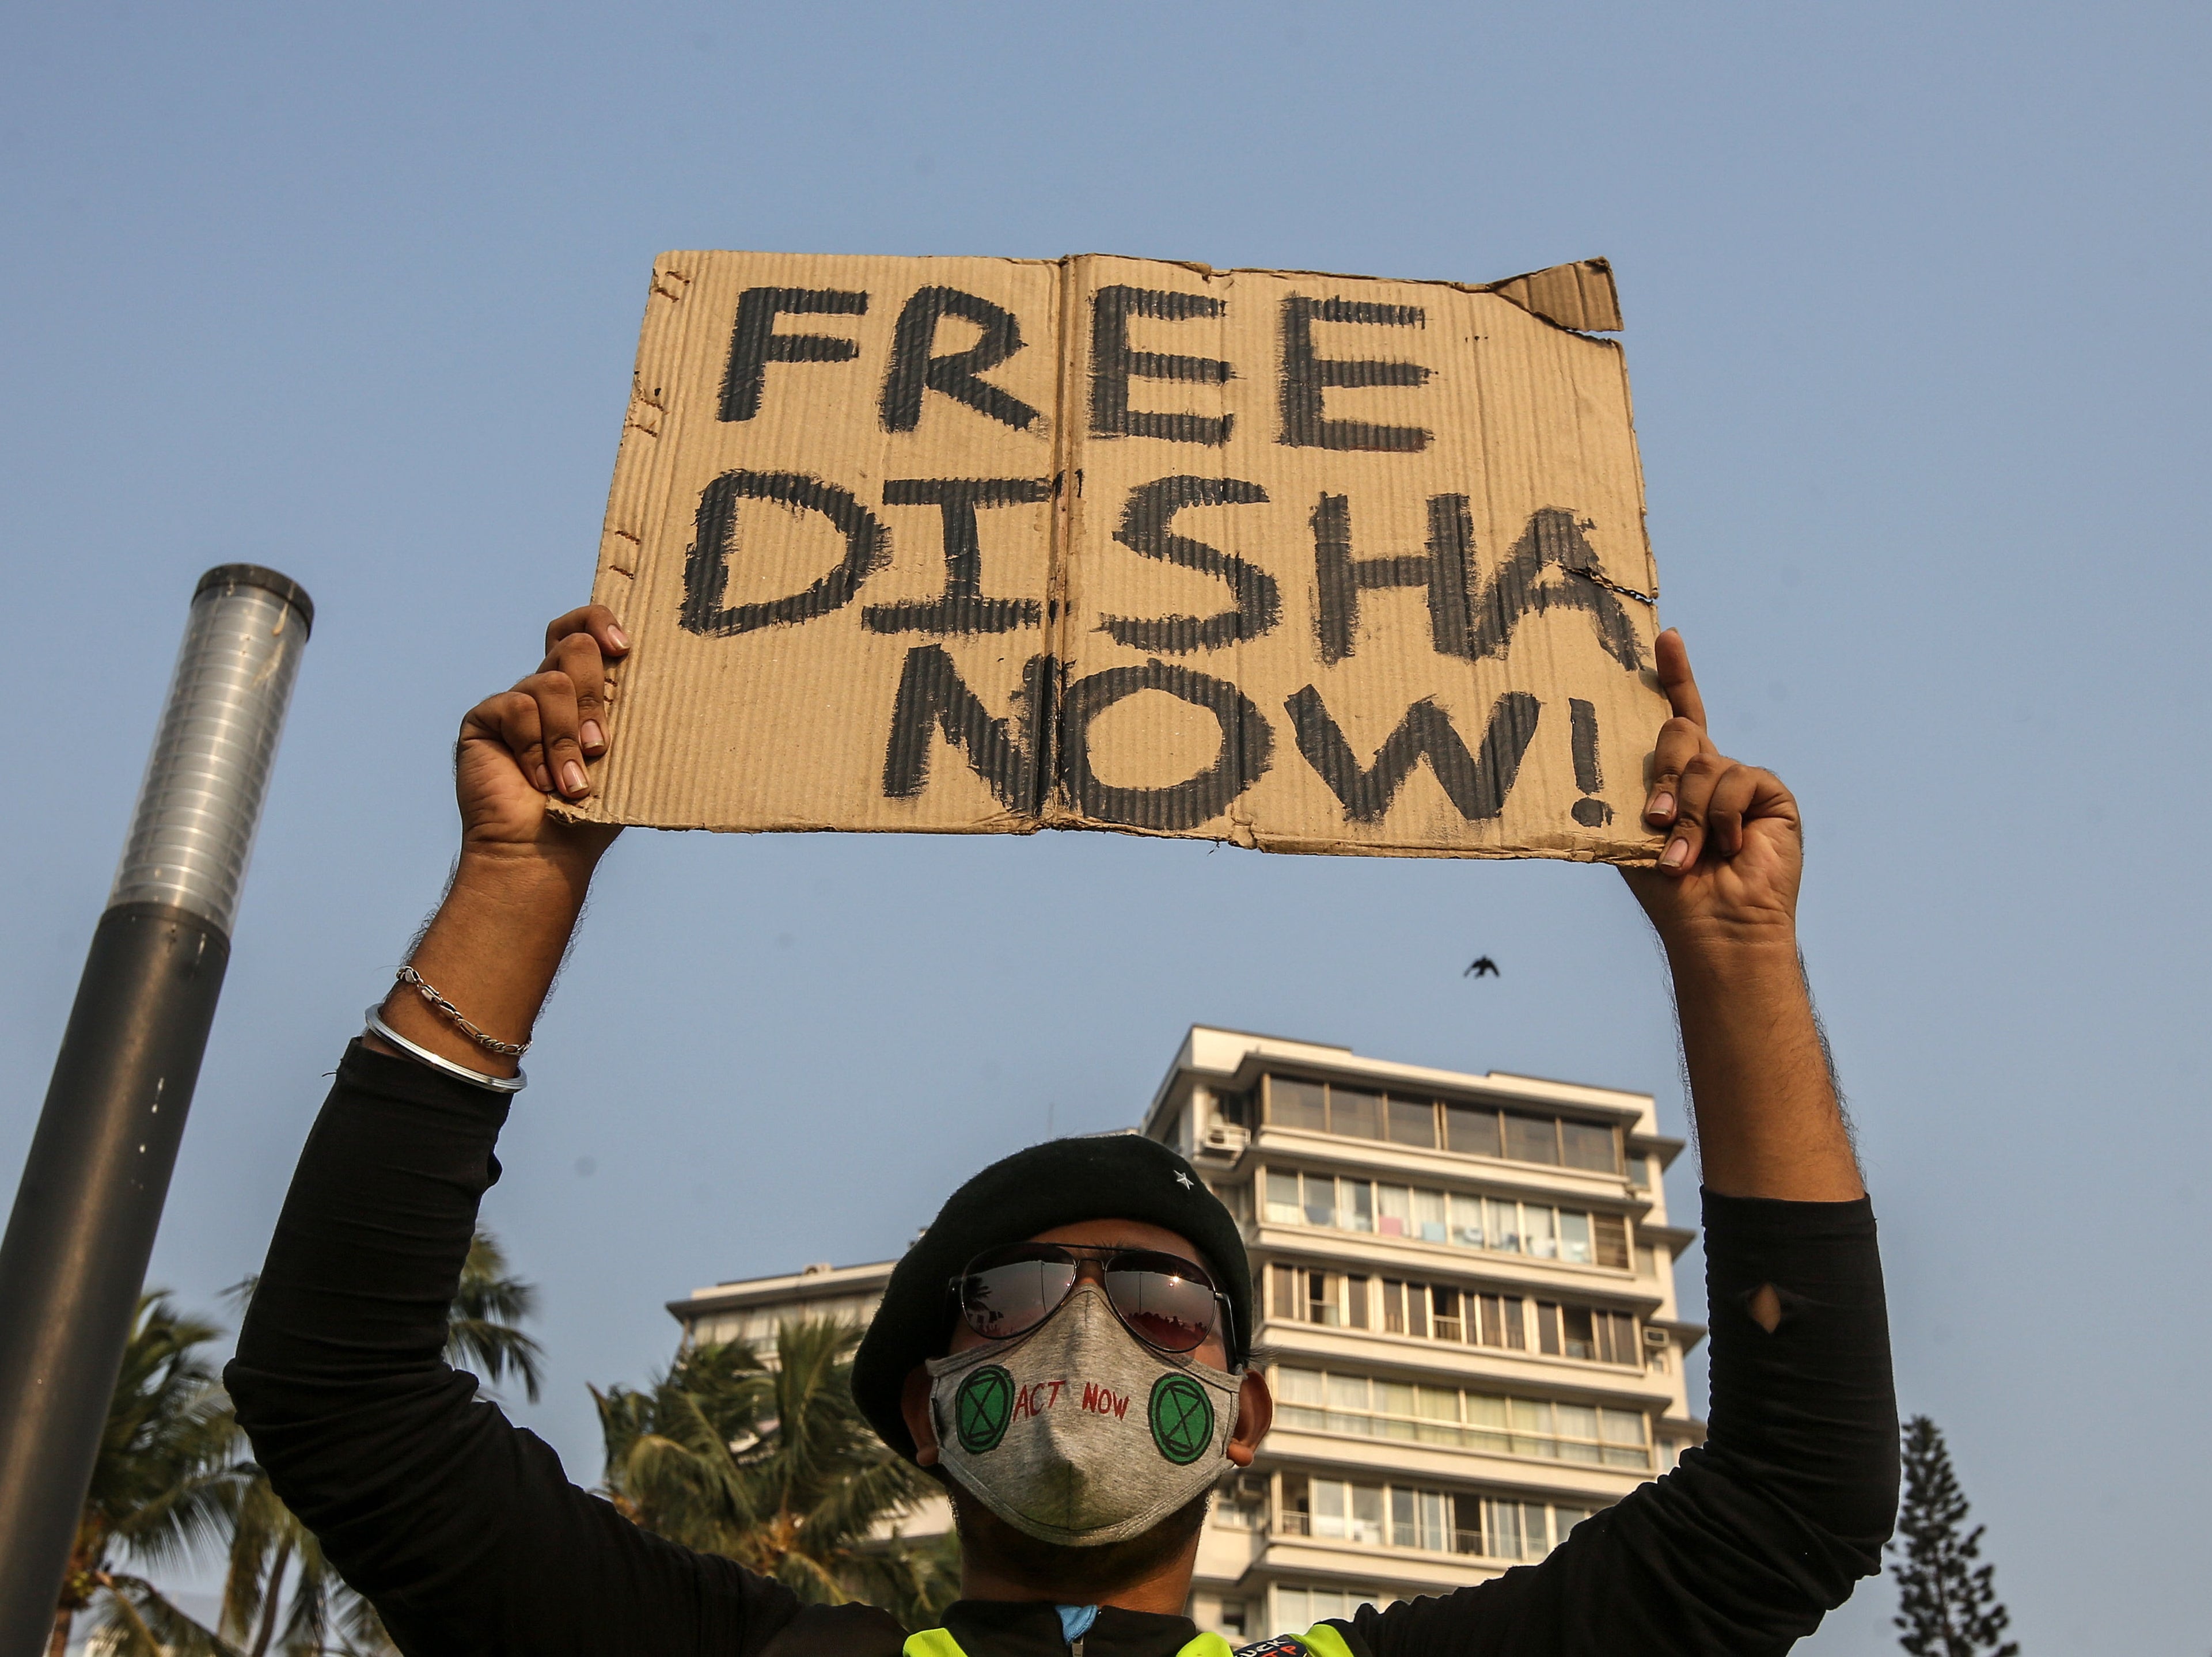 A protester demands the release of climate activist Disha Ravi after her arrest by the Delhi police in connection with a toolkit shared by Greta Thunberg